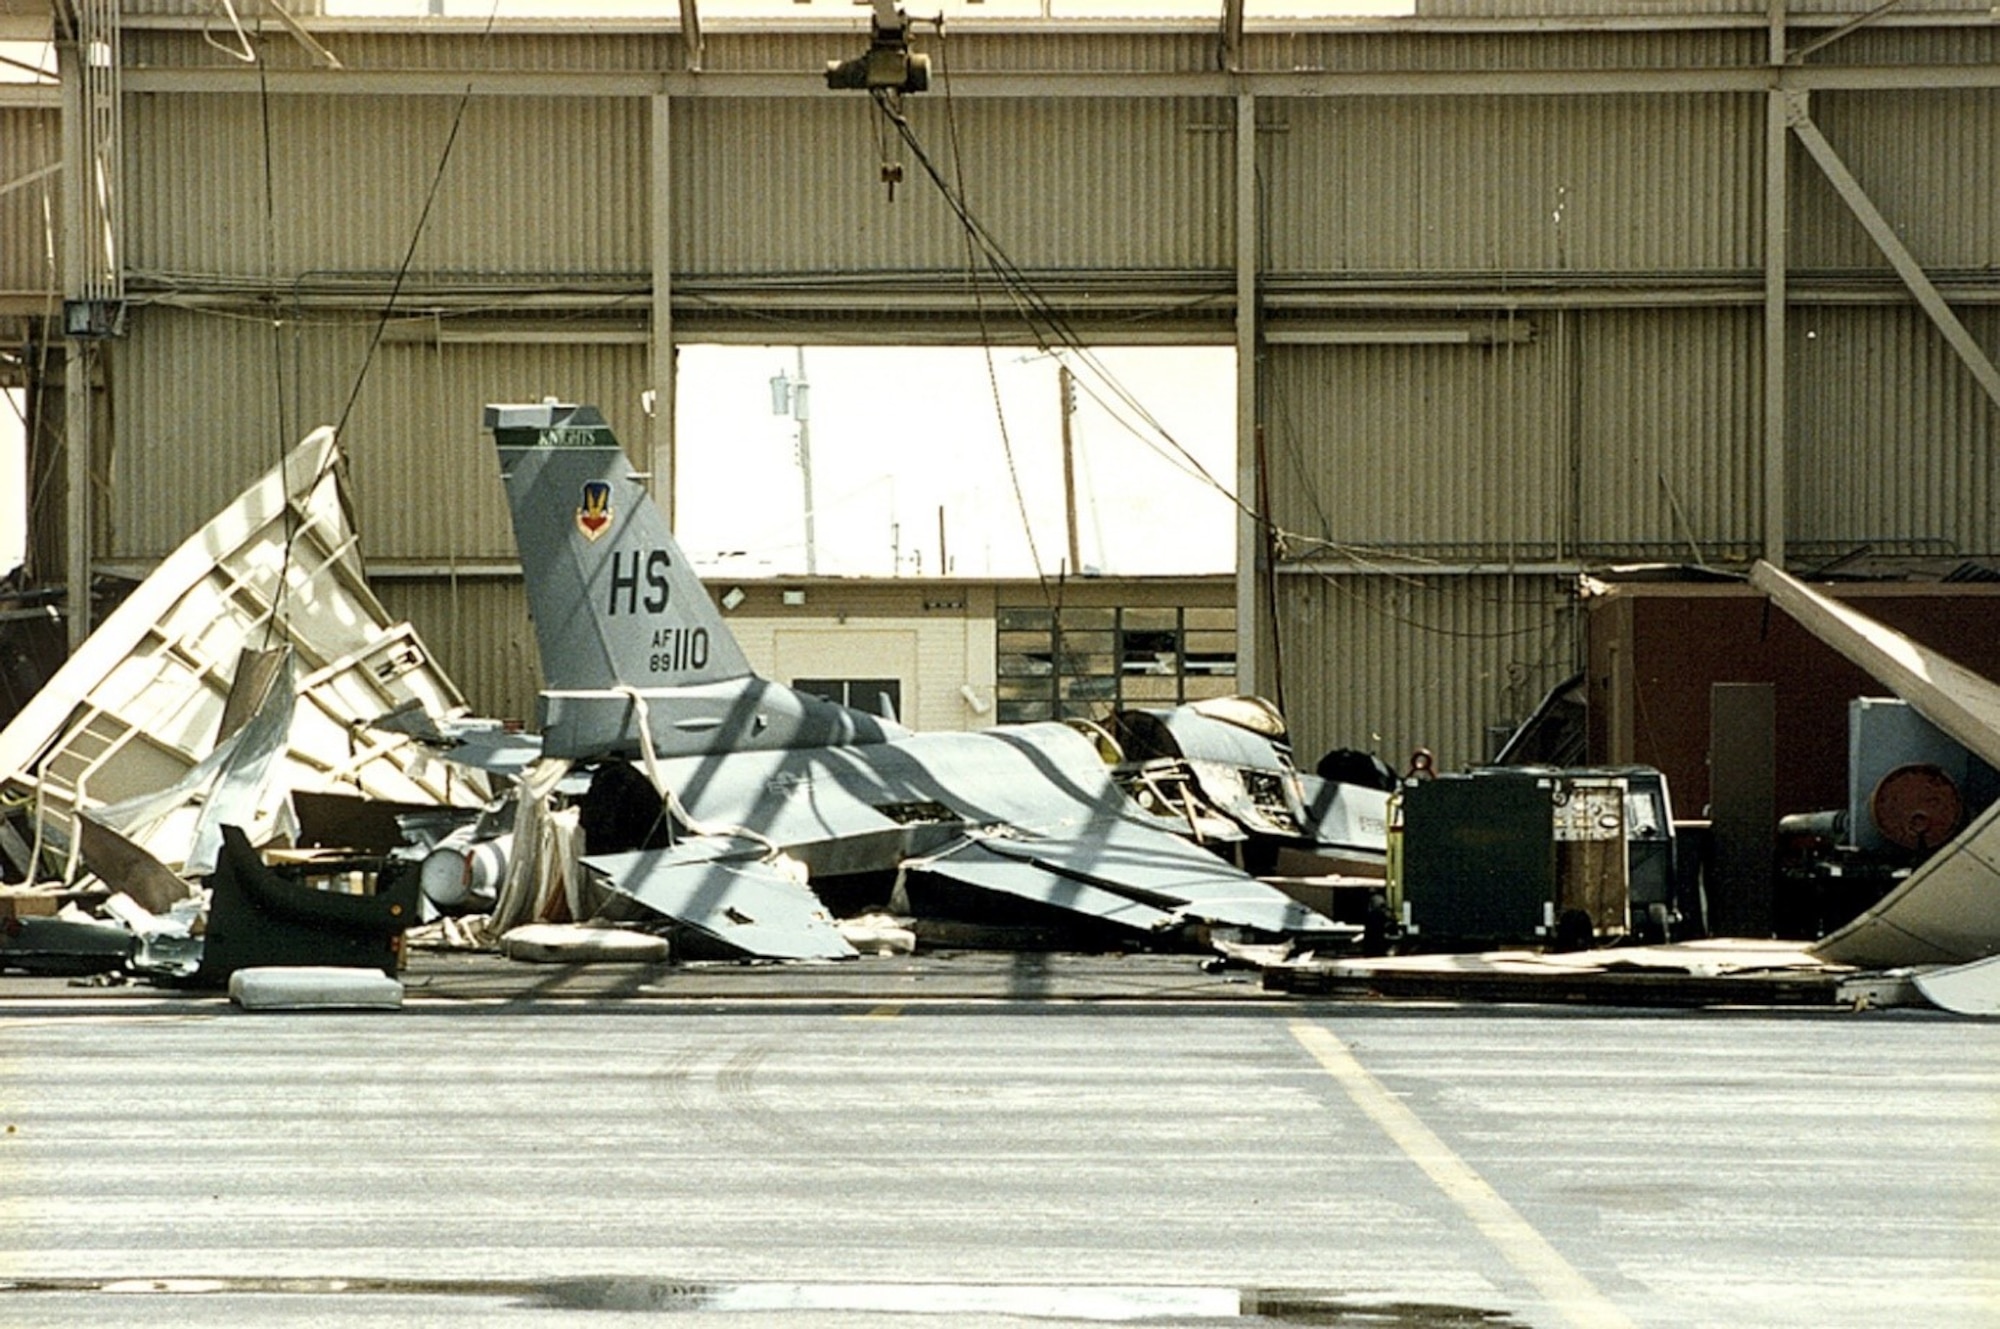 Photo of one of the F-16 Fighting Falcons left behind in a demolished hangar.